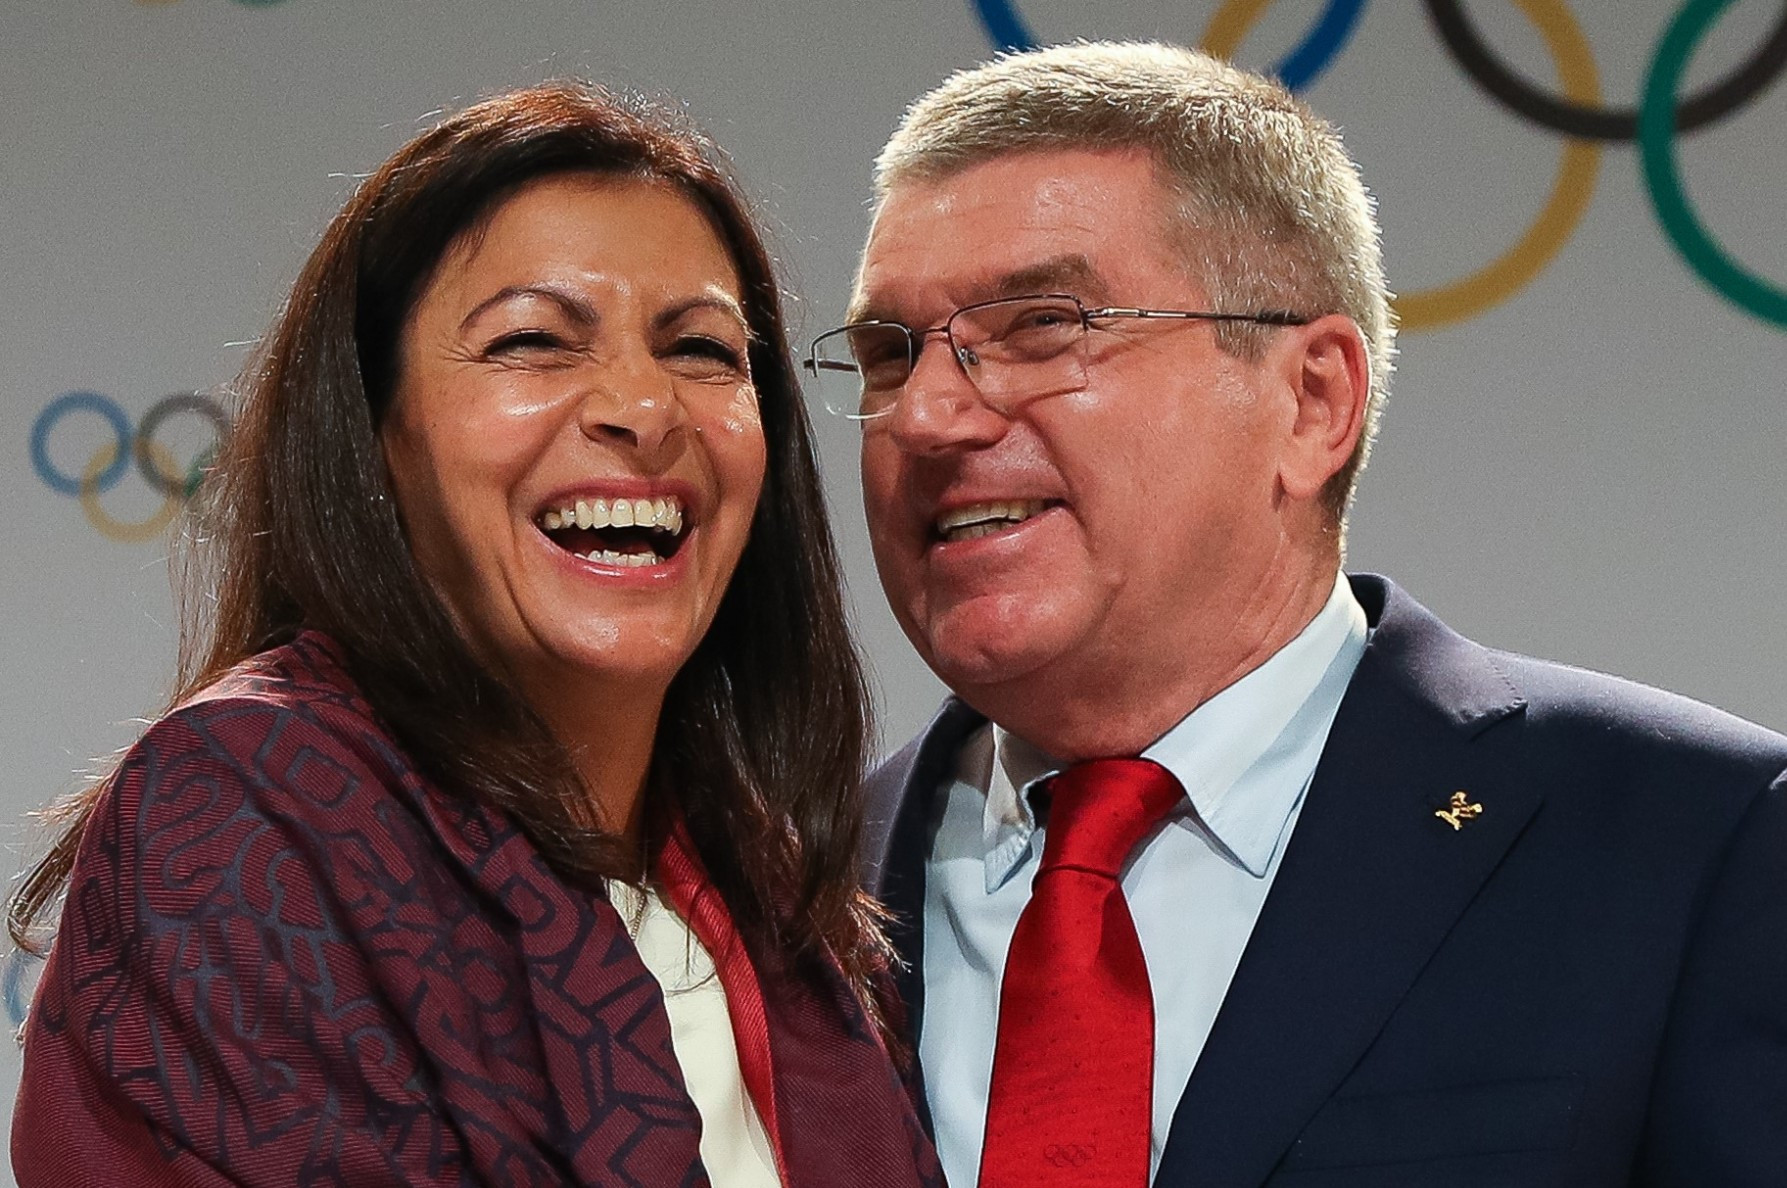 IOC President Thomas Bach, right, is set to meet Paris Mayor Anne Hidalgo in the French capital to discuss preparations for the 2024 Olympic and Paralympic Games tomorrow ©Getty Images